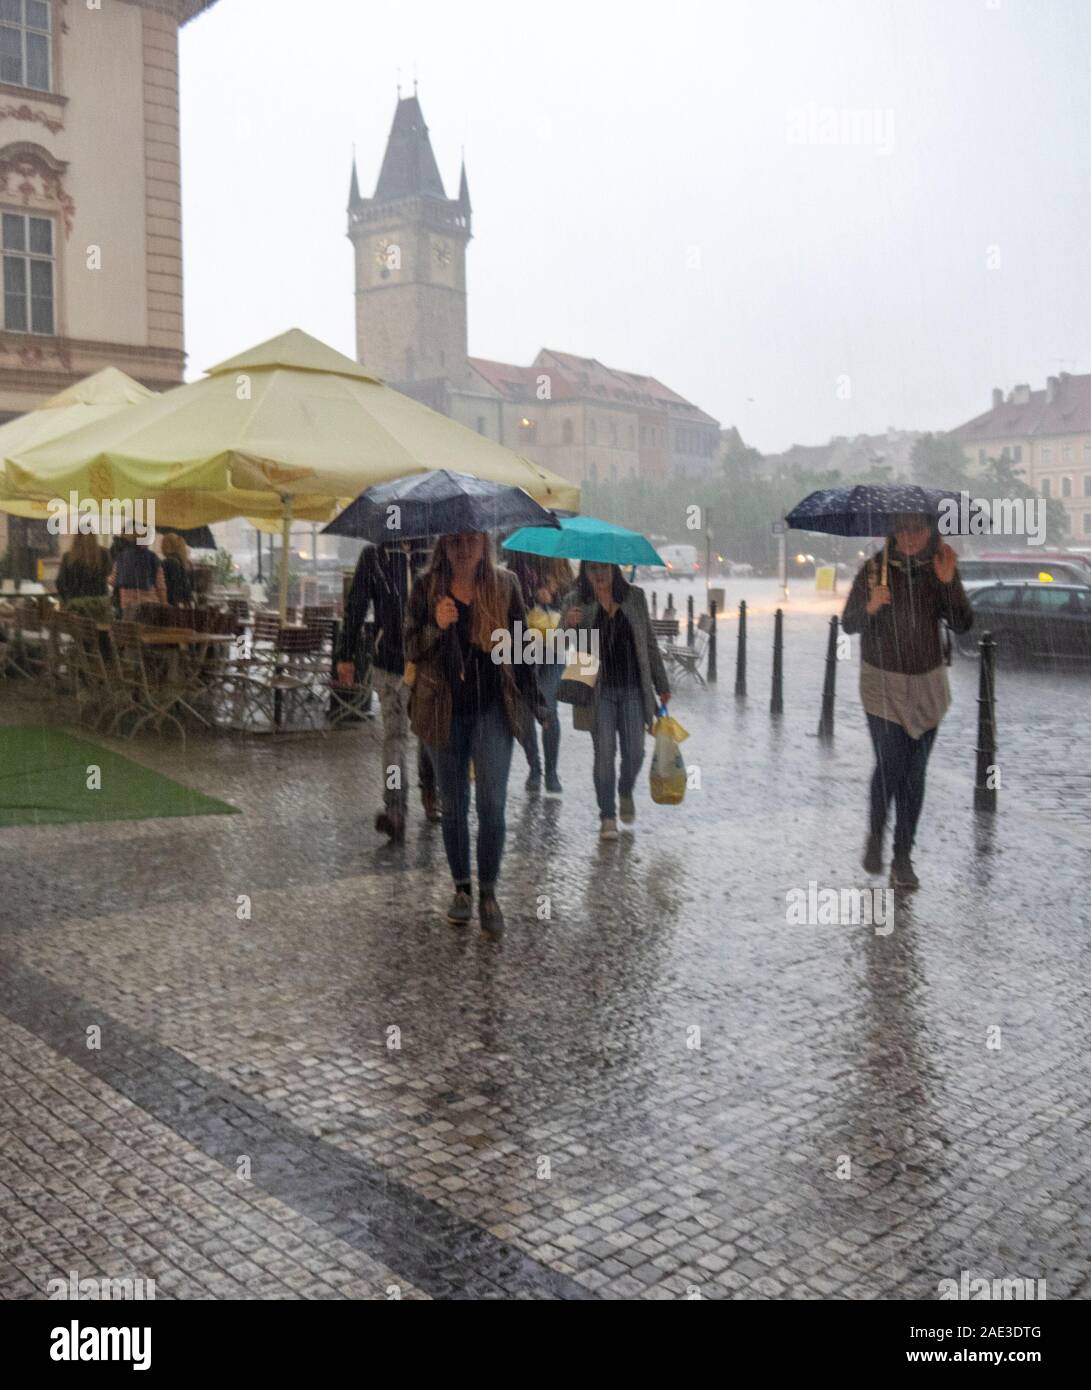 Tourists with umbrellas in a heavy rain fall in Old Town Square Prague Czech Republic. Stock Photo